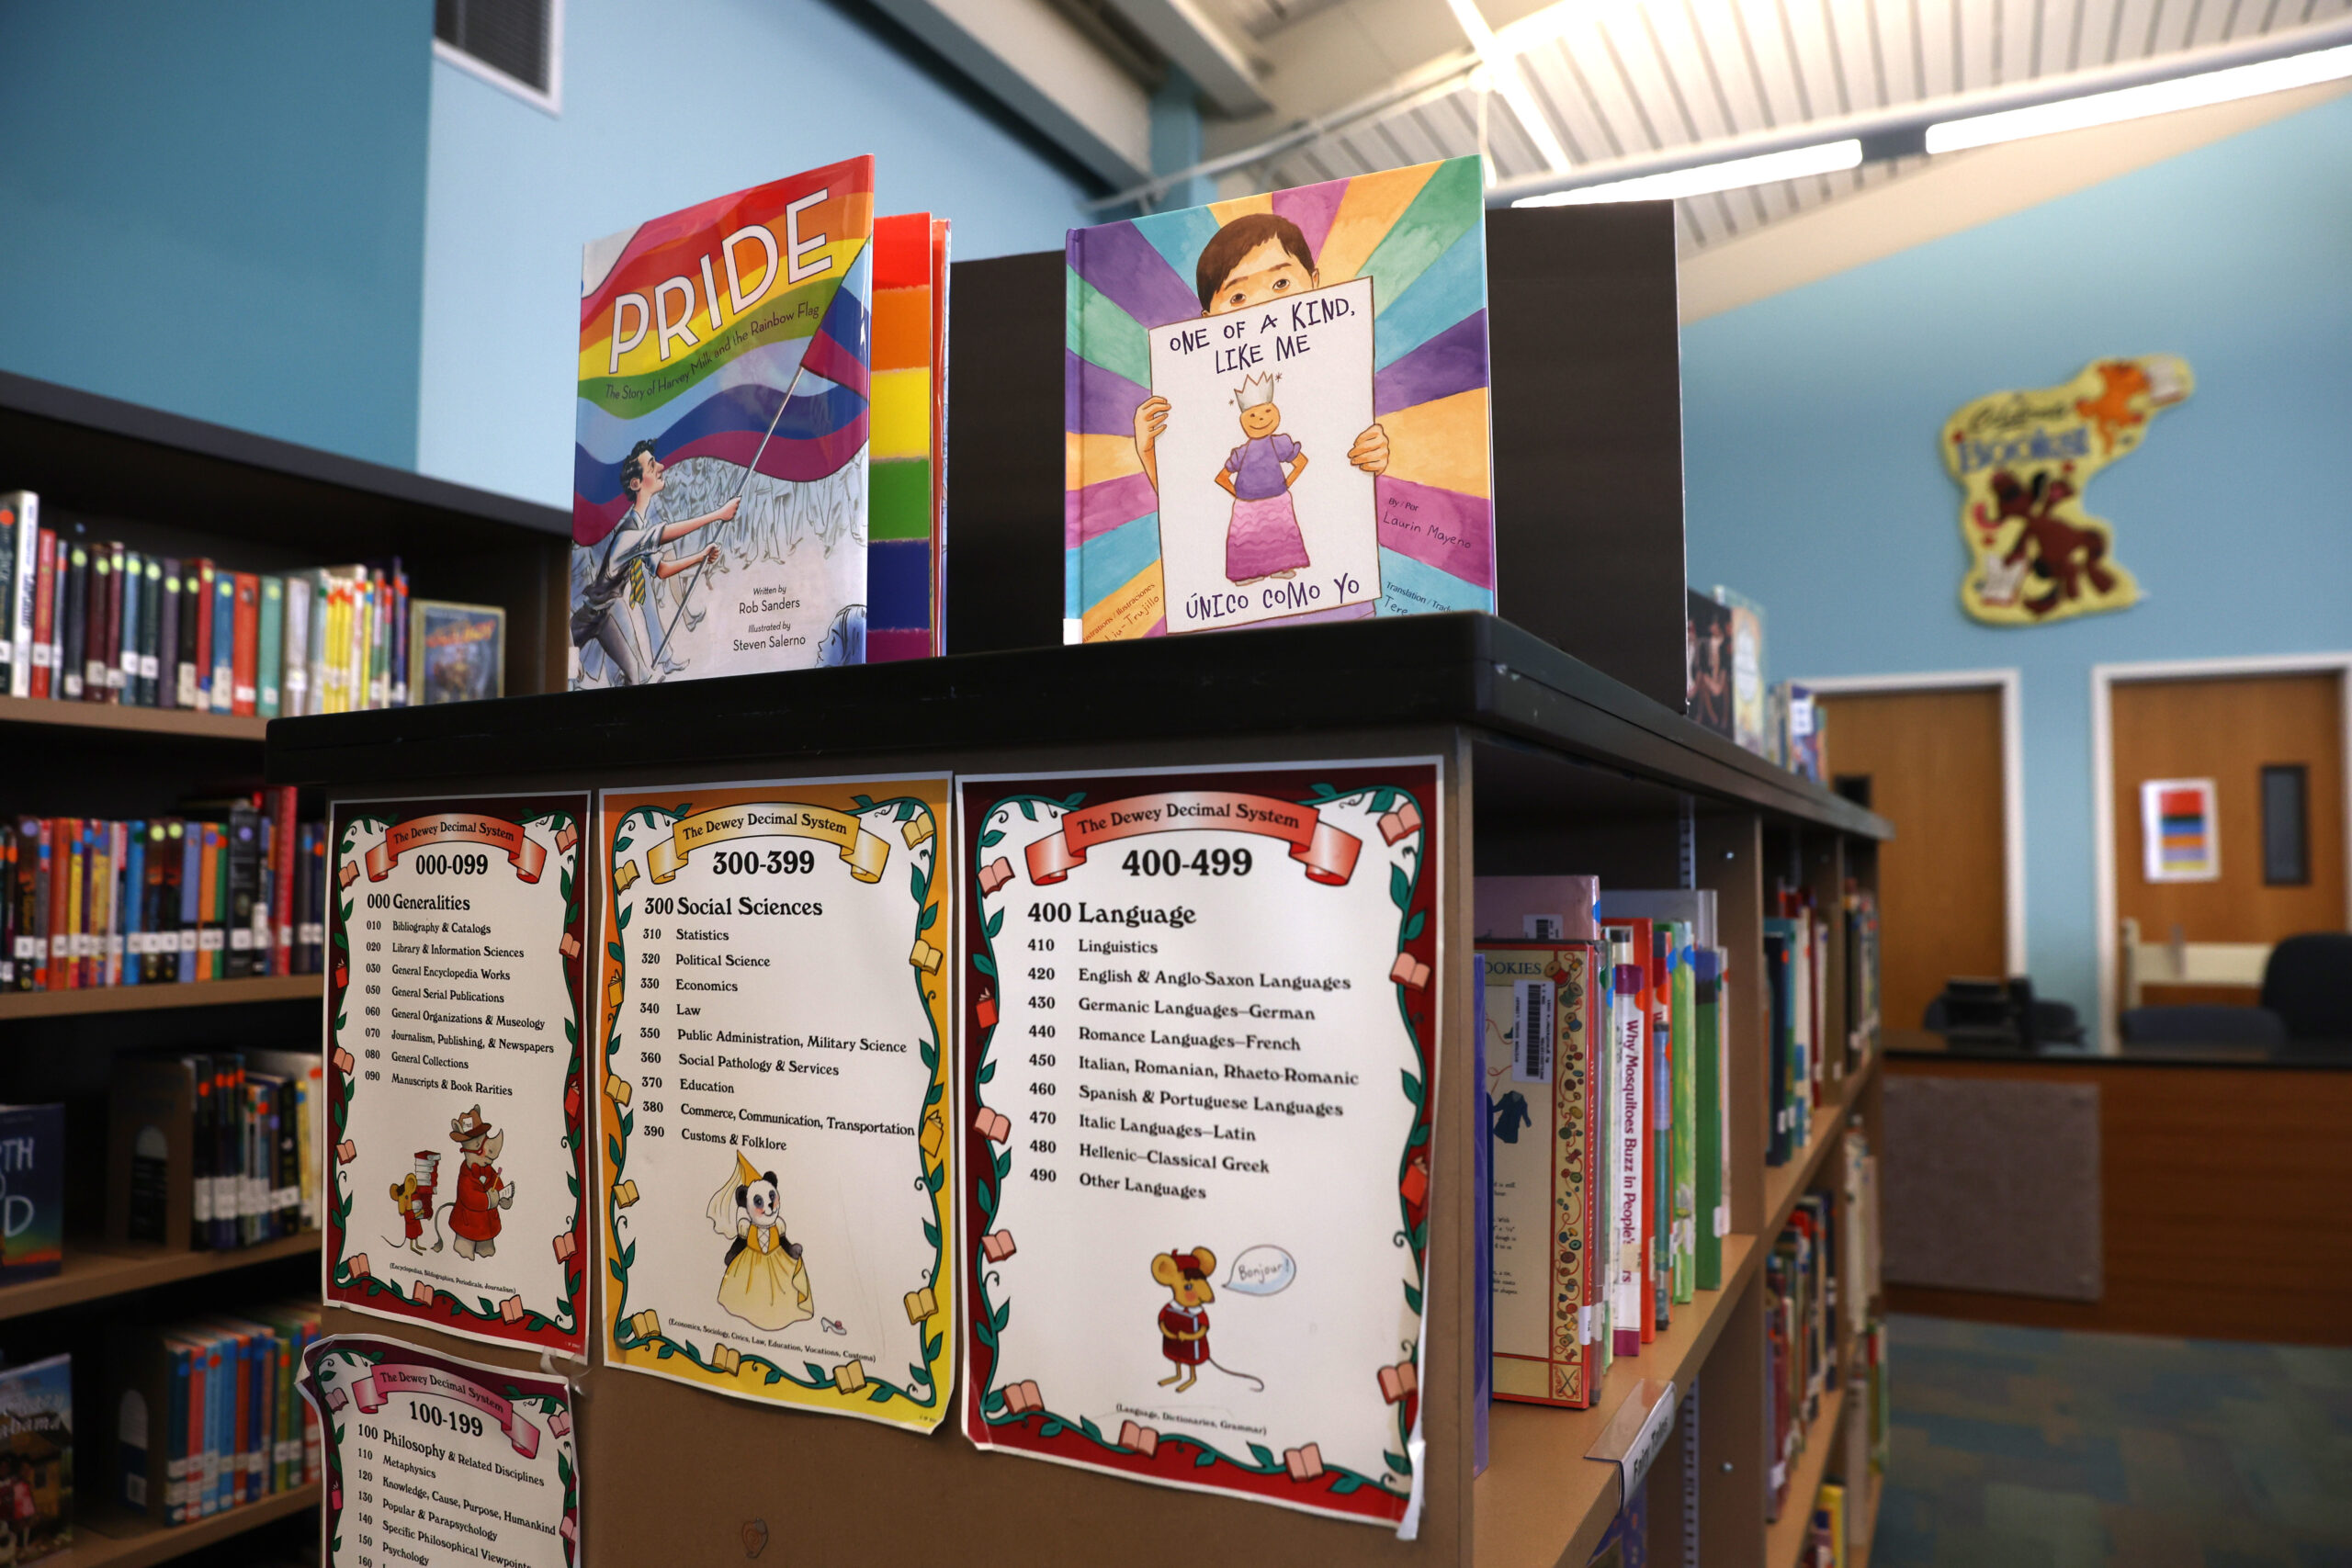 Library Group Frames Removal Of Graphic Sexual Content From School Libraries As ‘Record Number’ Of ‘Book Bans’